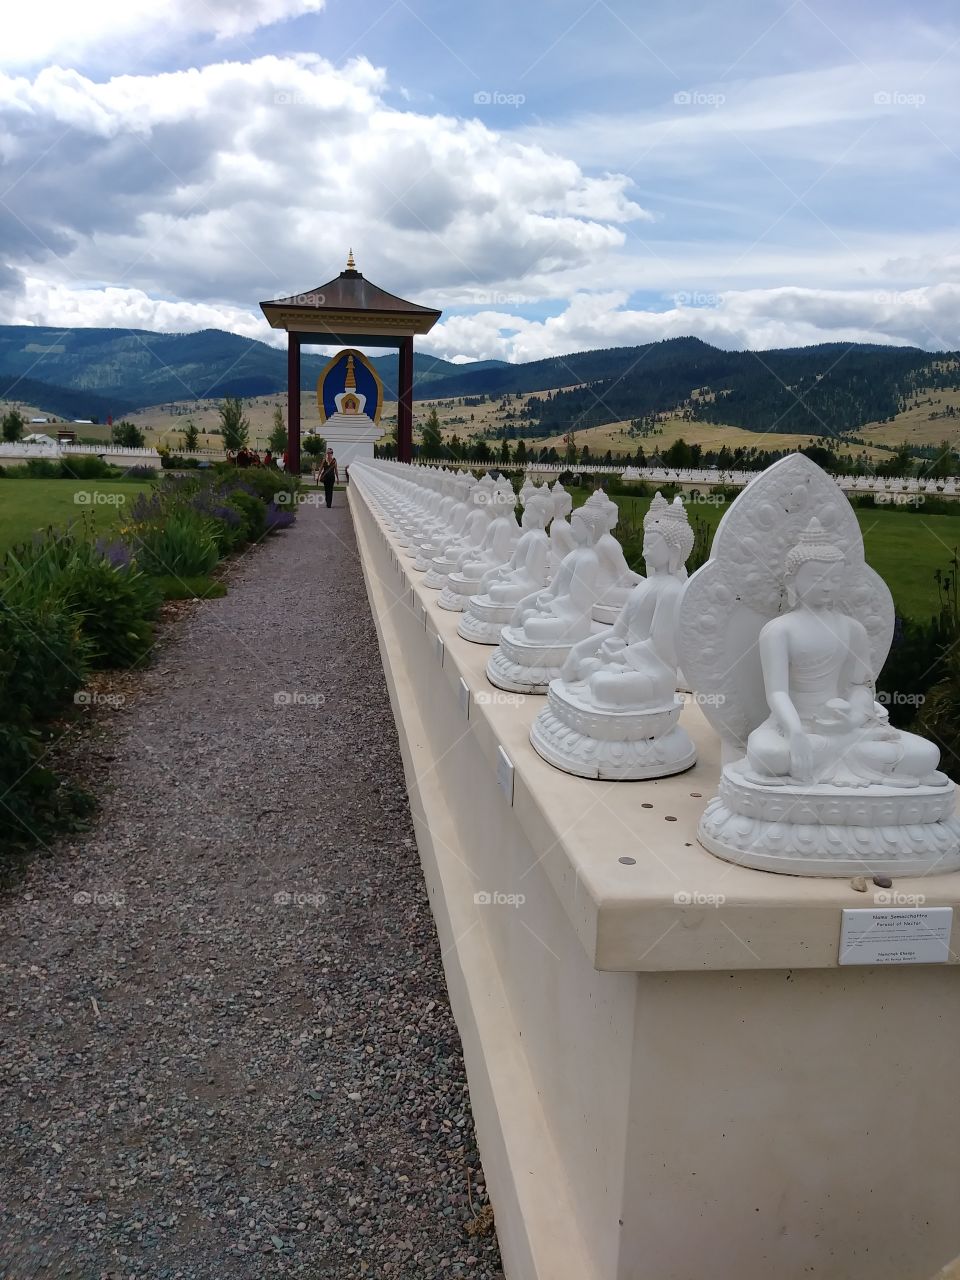 At the Temple of a Thousand Buddhas, in Missoula, MT !!